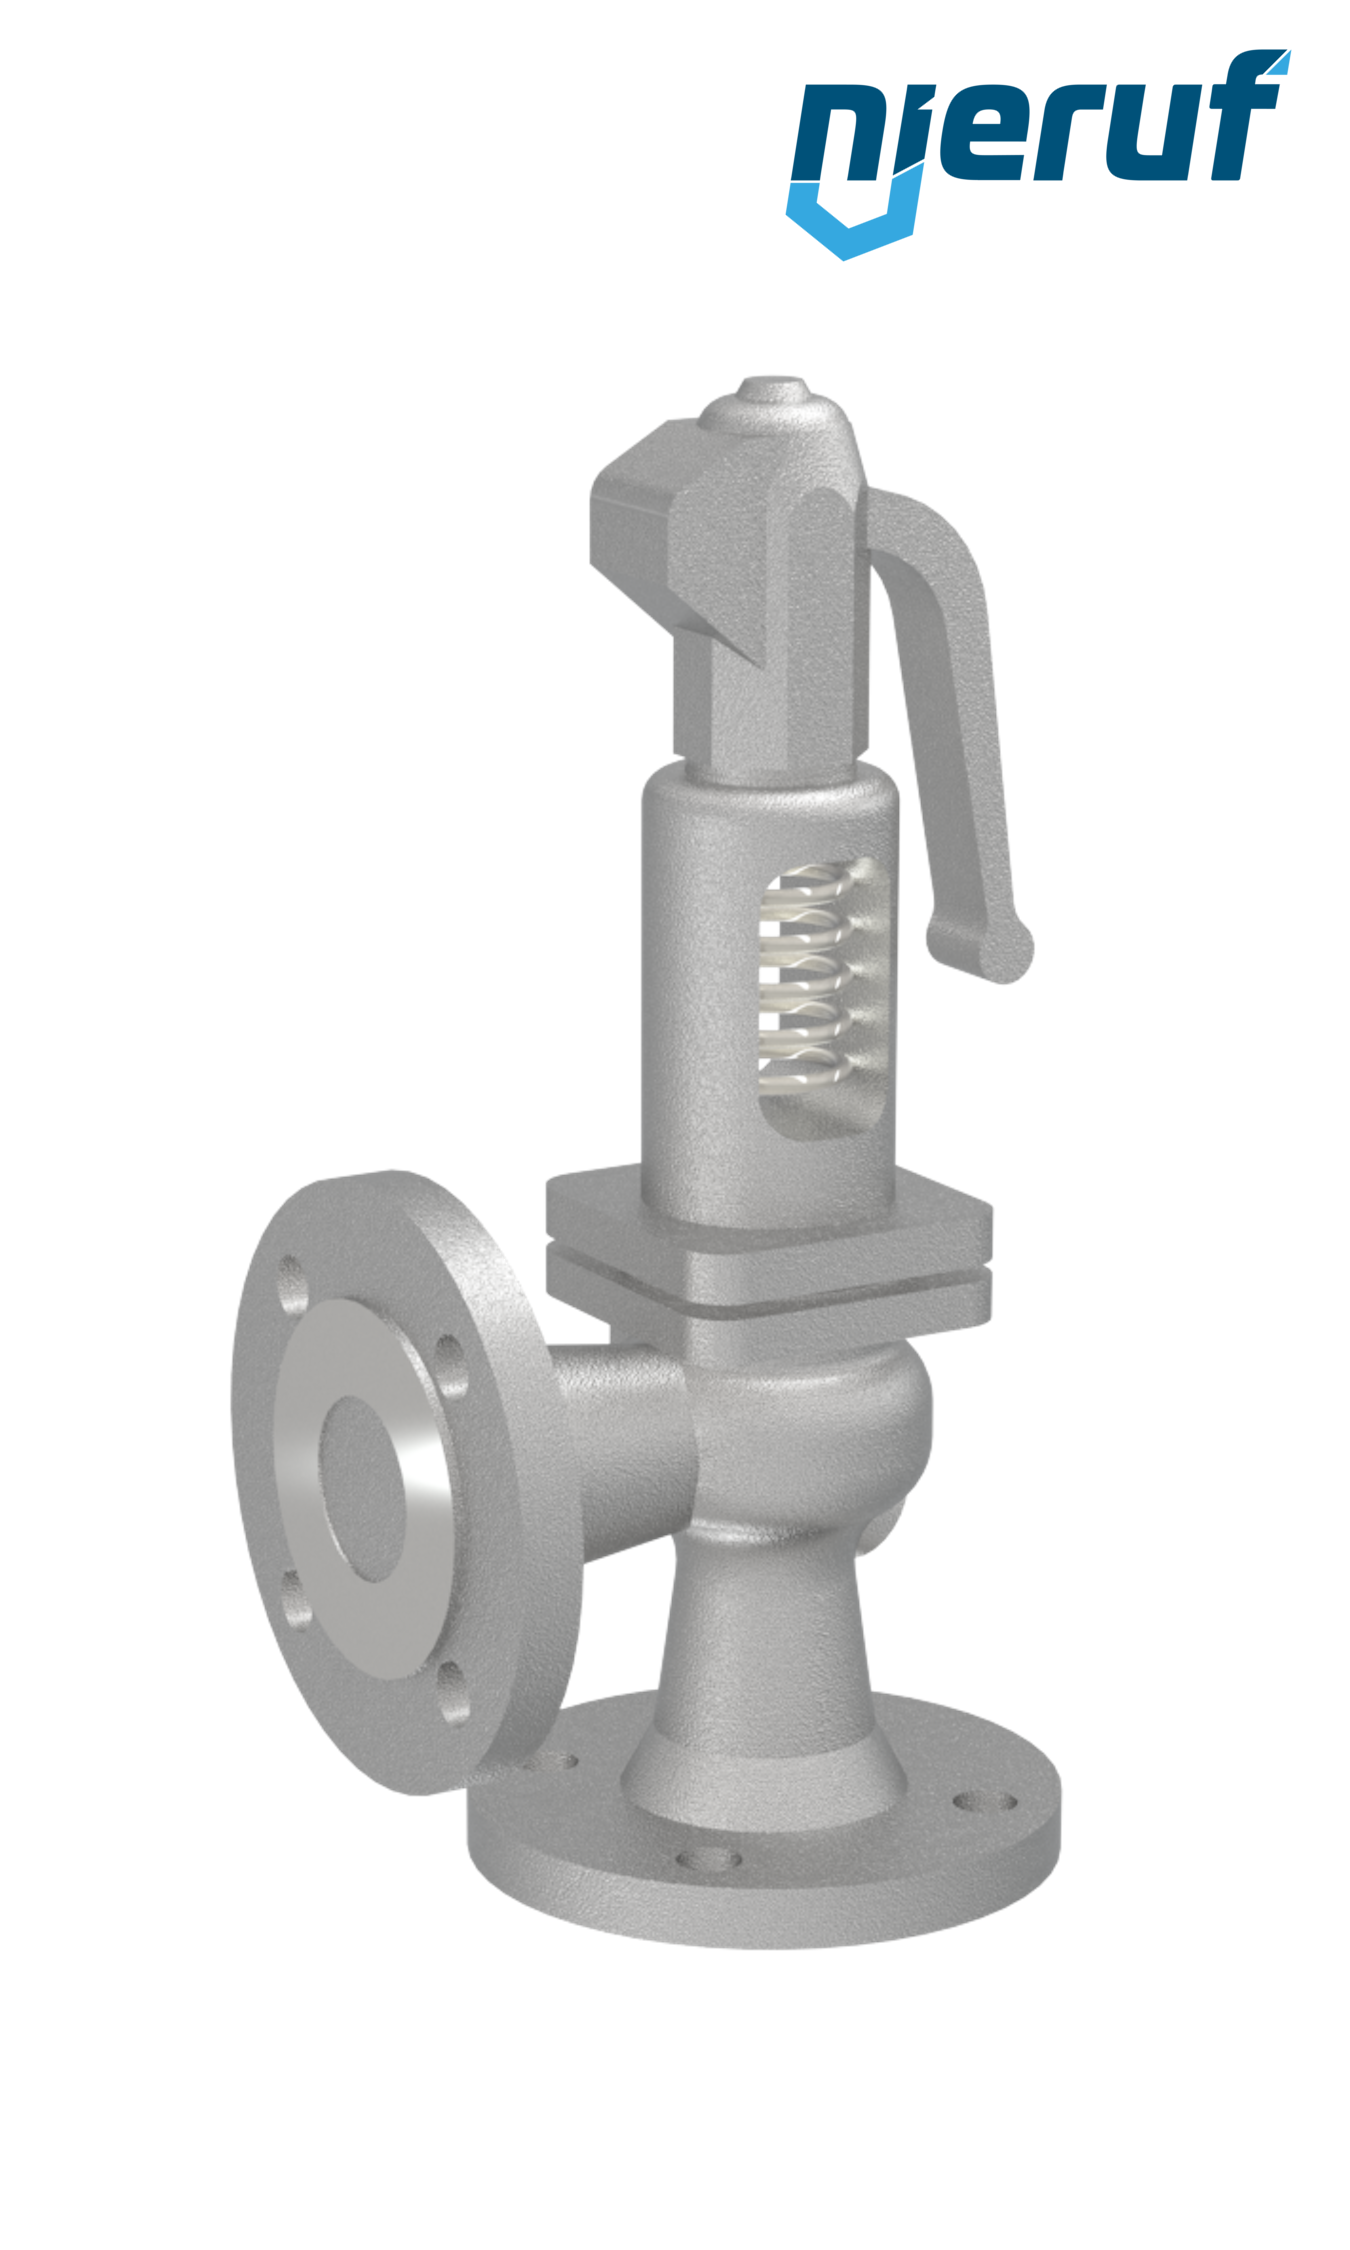 flange-safety valve DN65/DN65 SF0102, cast iron EN-JL1040 metal, with lever